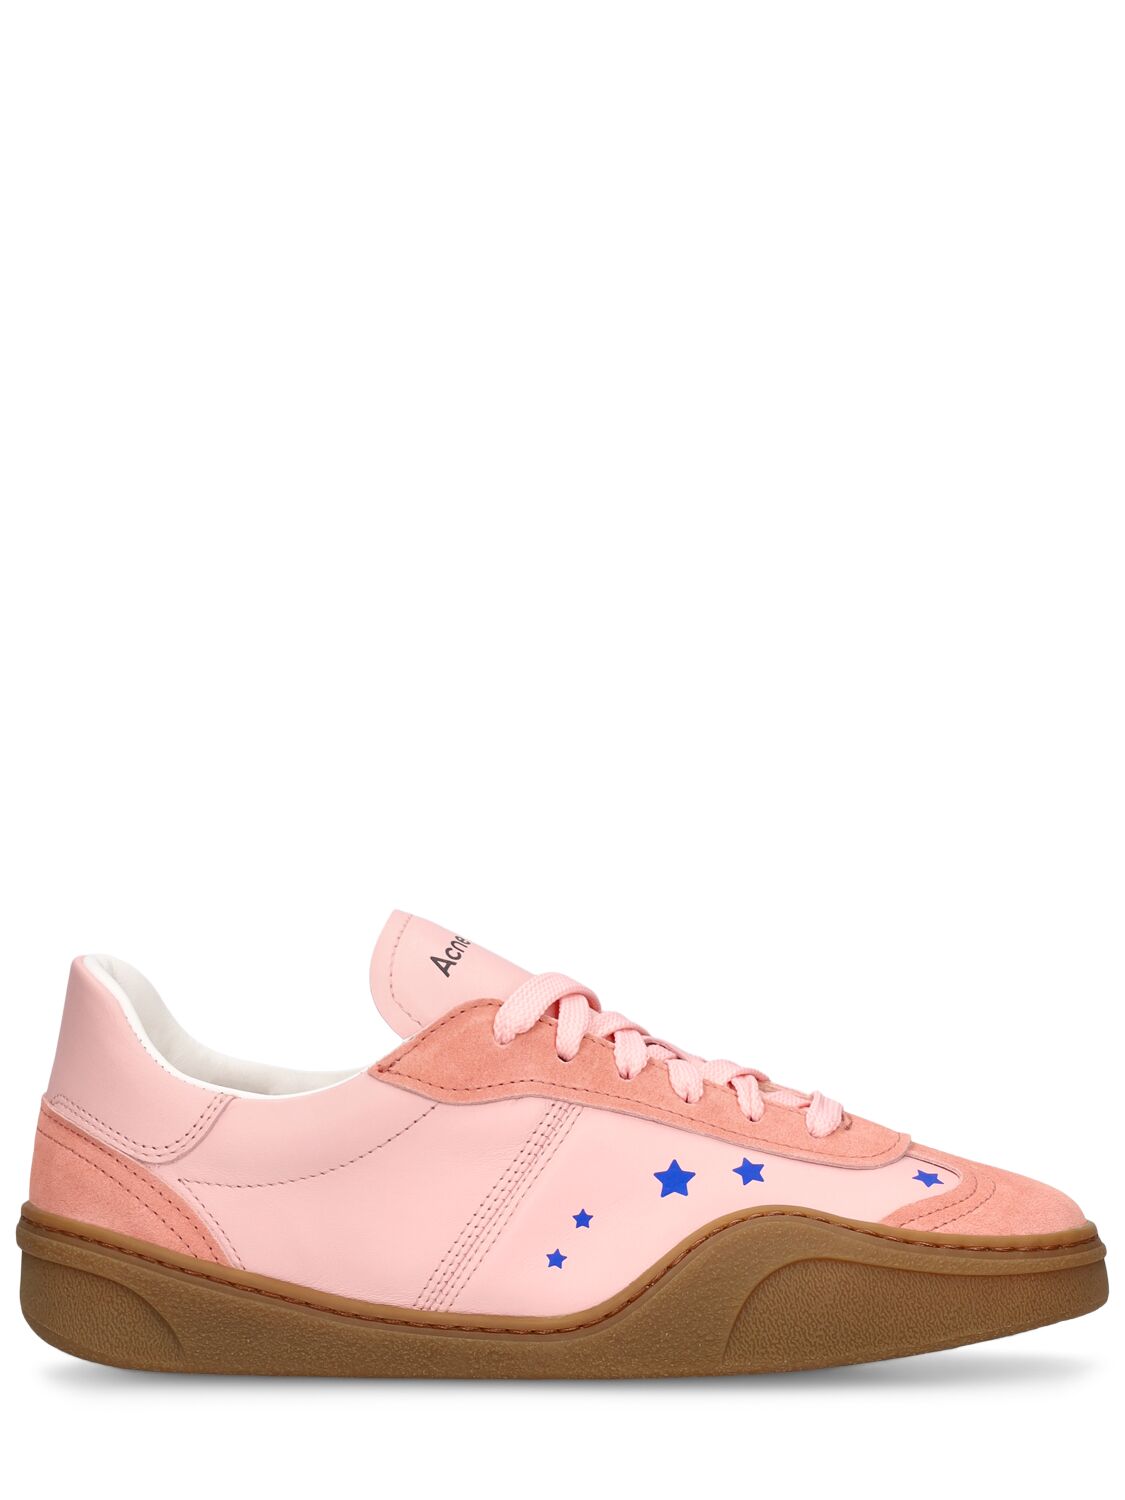 Bars Stars Leather Sneakers